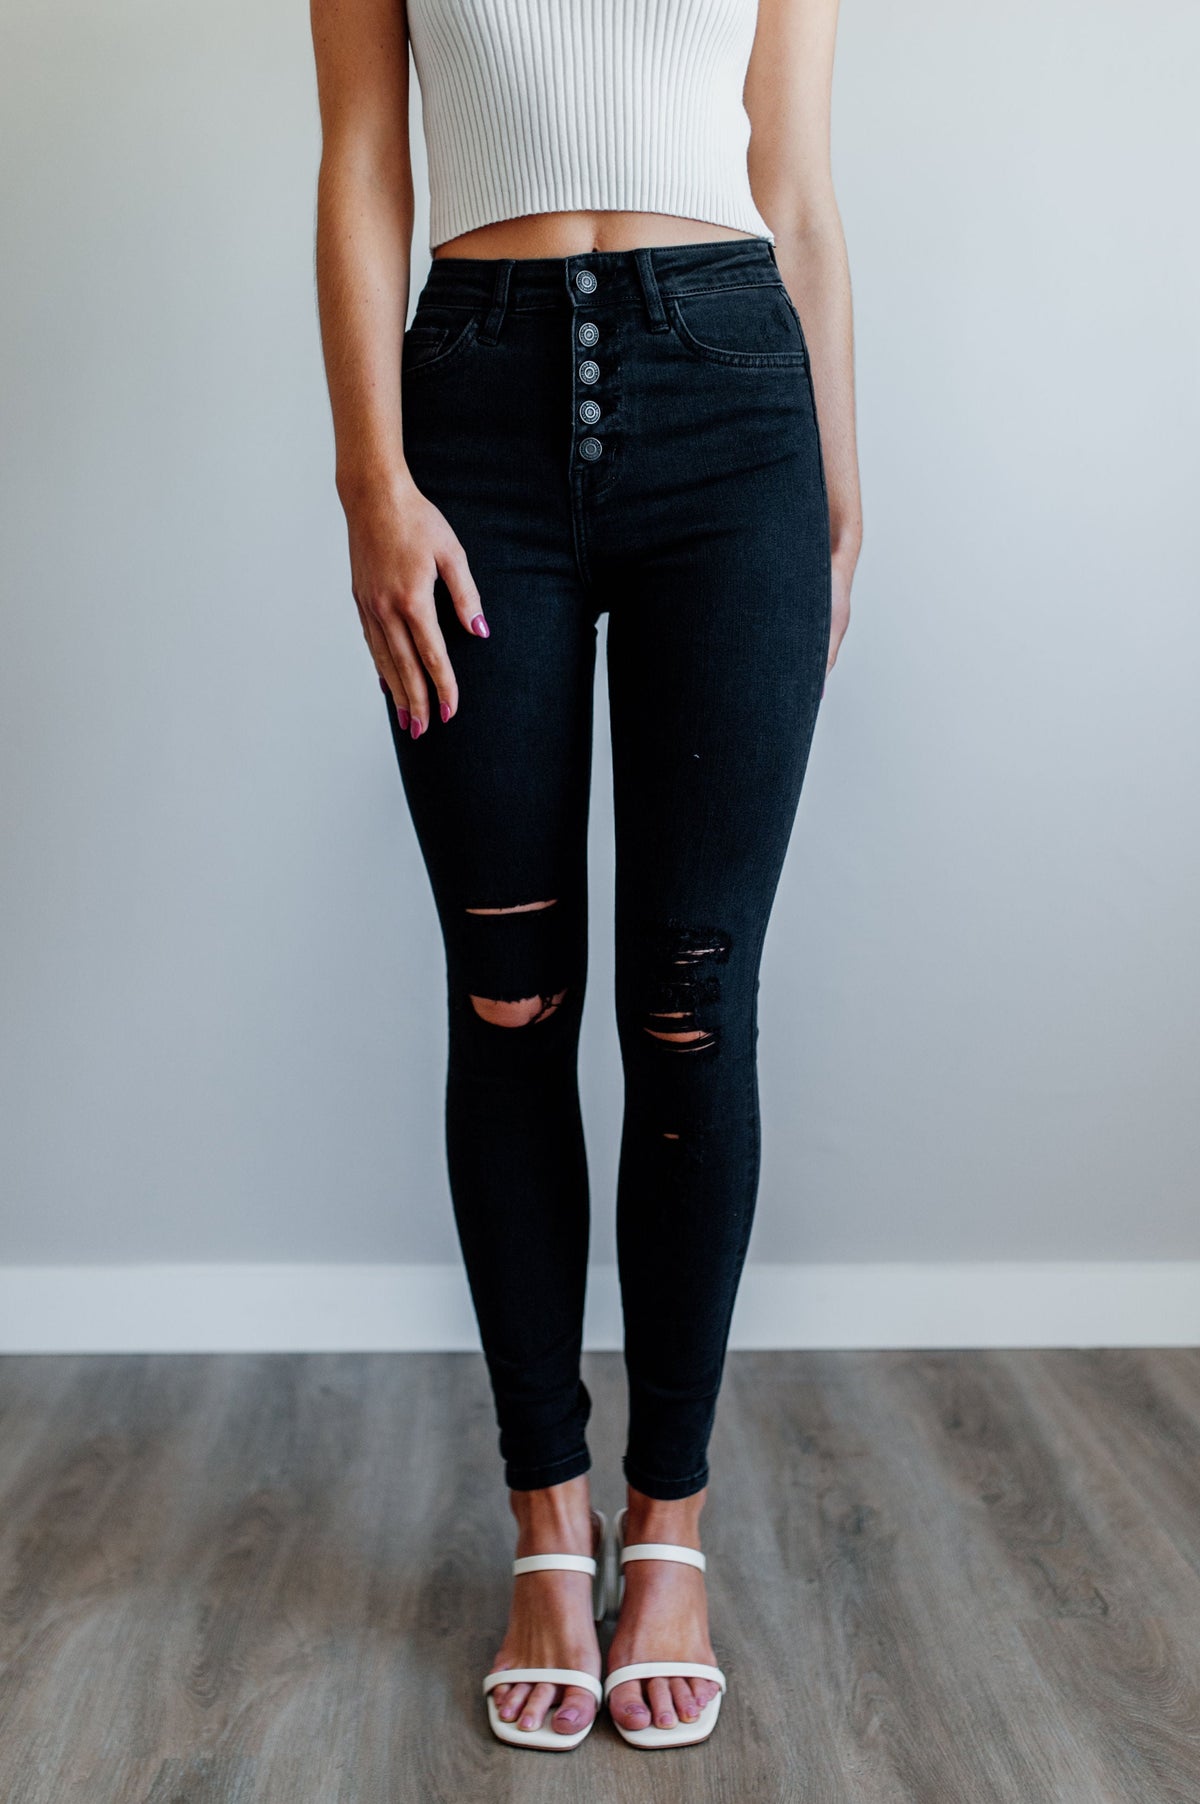 Pictured is a pair of black denim with a high-rise waist, button fly, and knee distressing on both legs. 